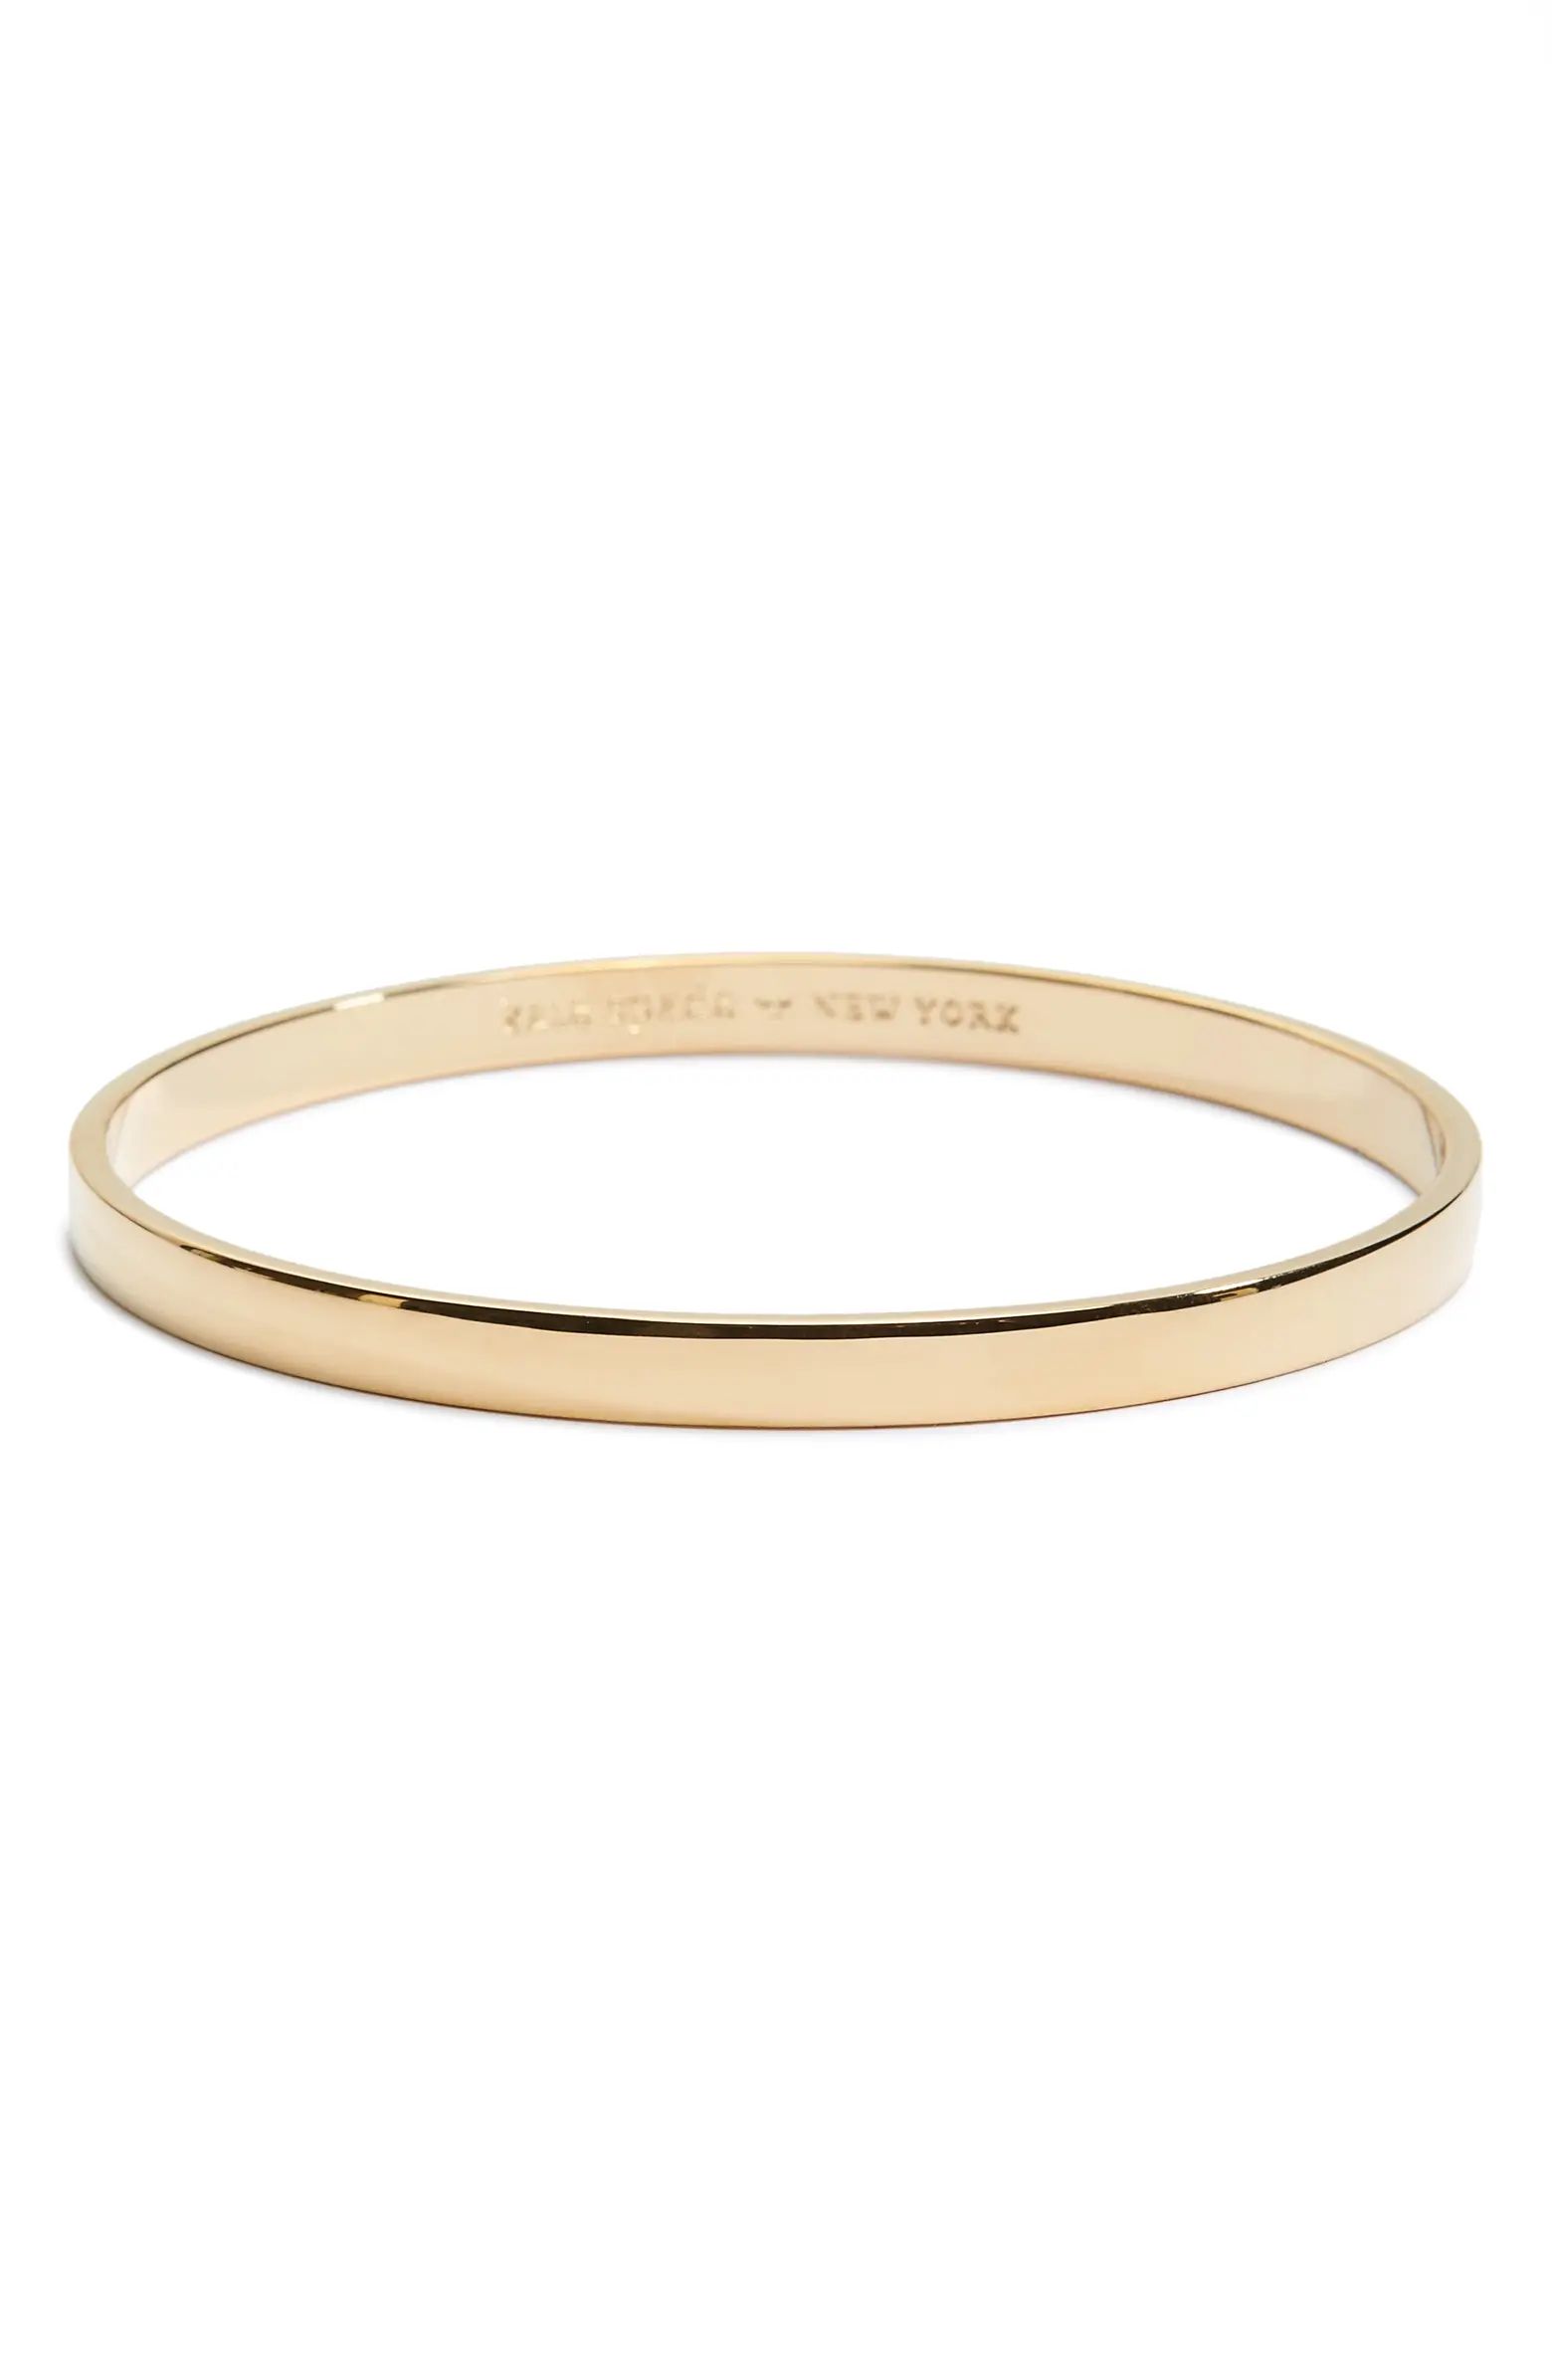 idiom - heart of gold bangle | Nordstrom